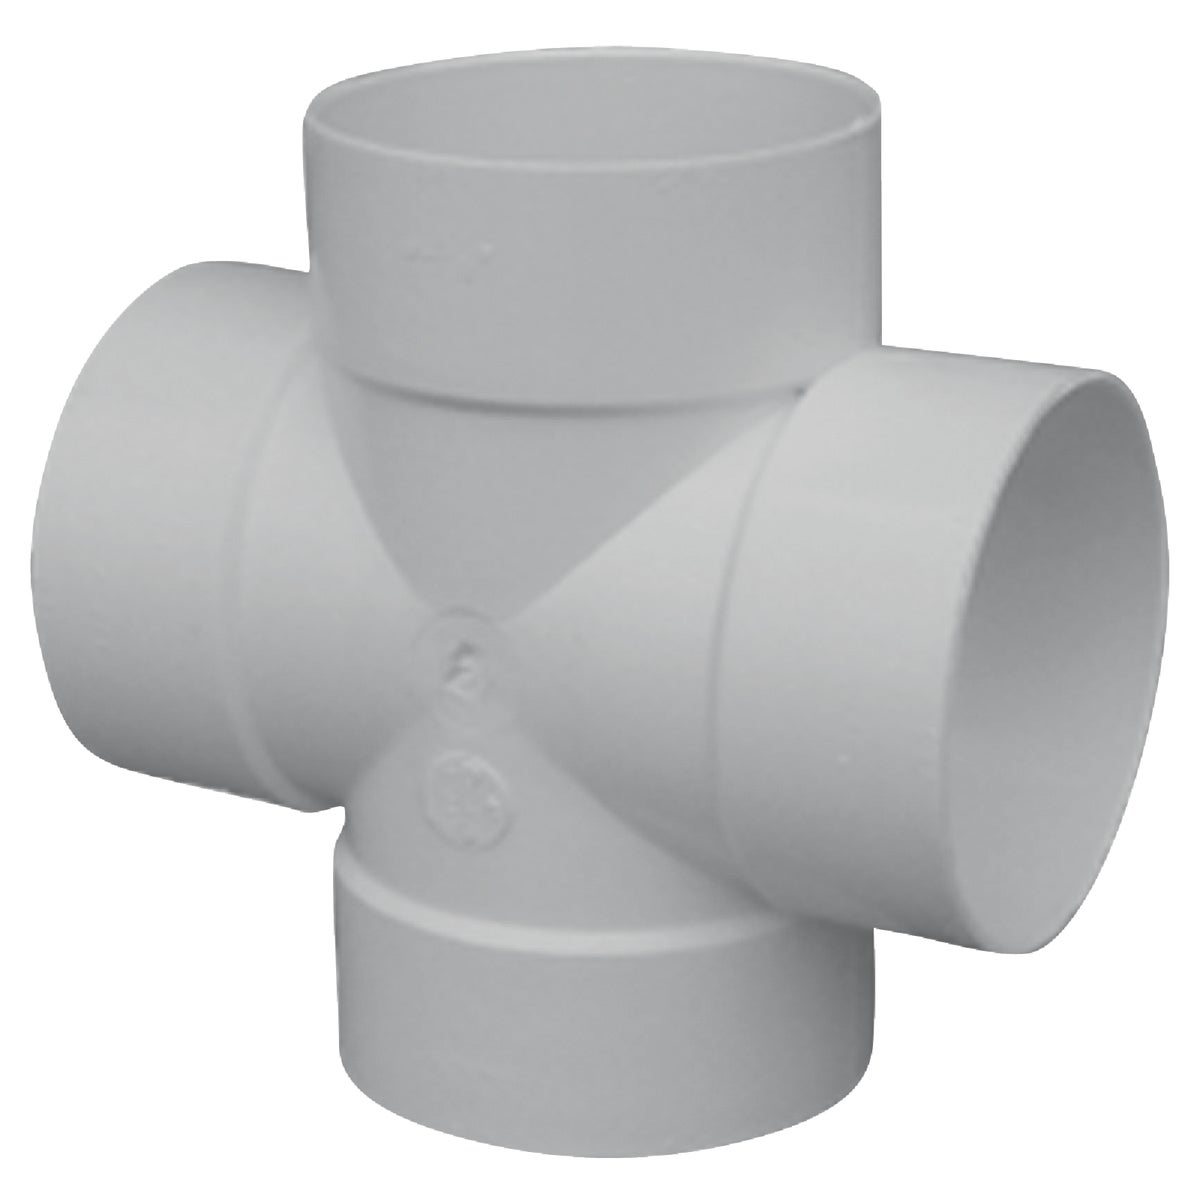 IPEX Canplas SDR35 Sewer and Drain 4 In. Solvent Weld PVC Cross 